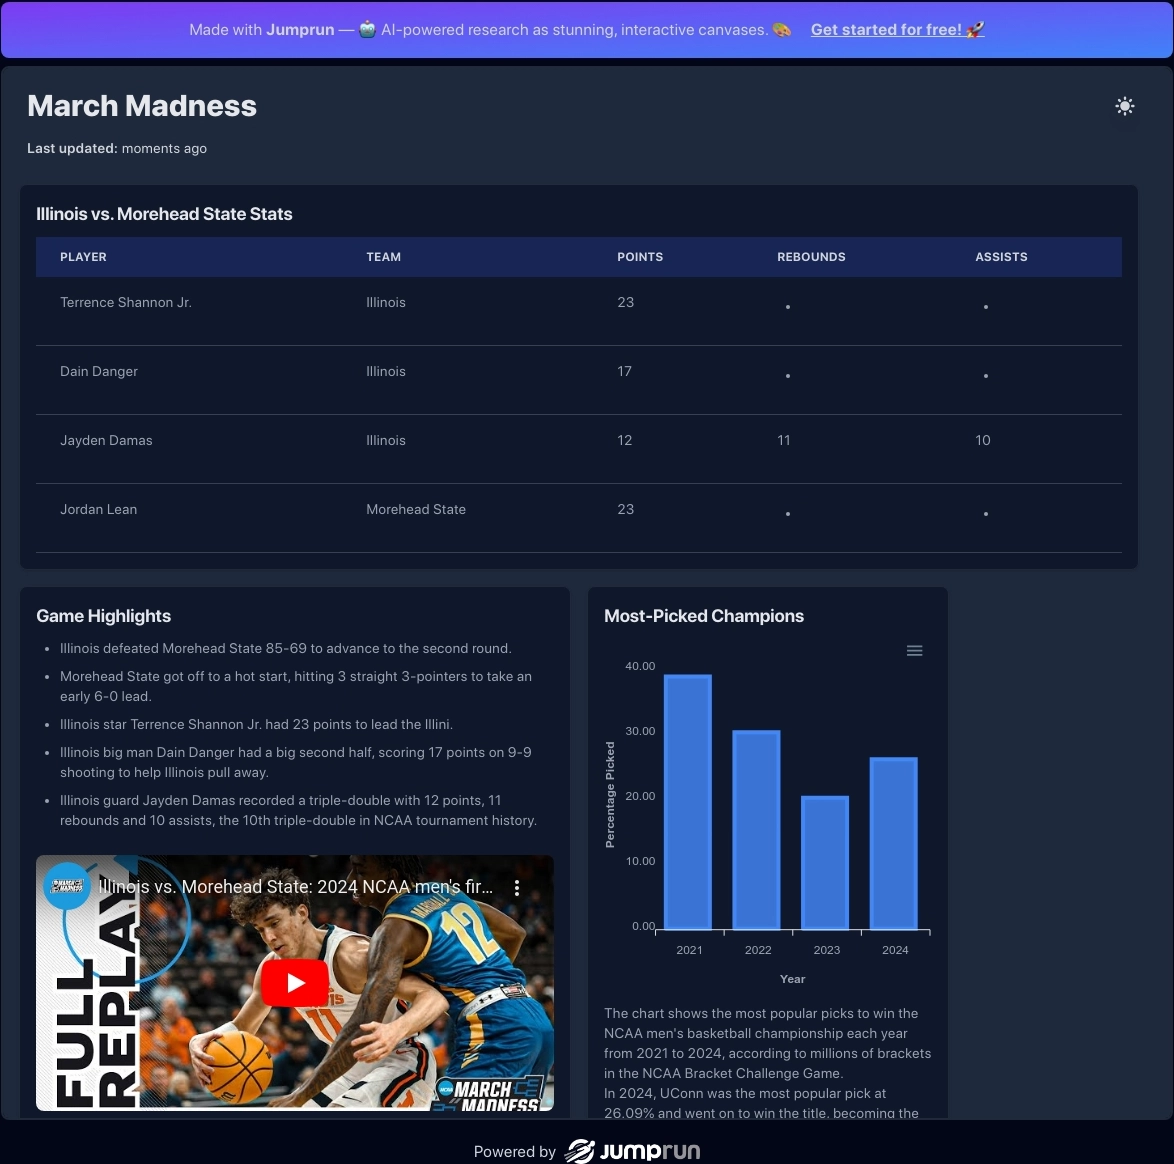 Get the latest news, stats, analysis and updates on the thrilling 2024 NCAA March Madness tournament.